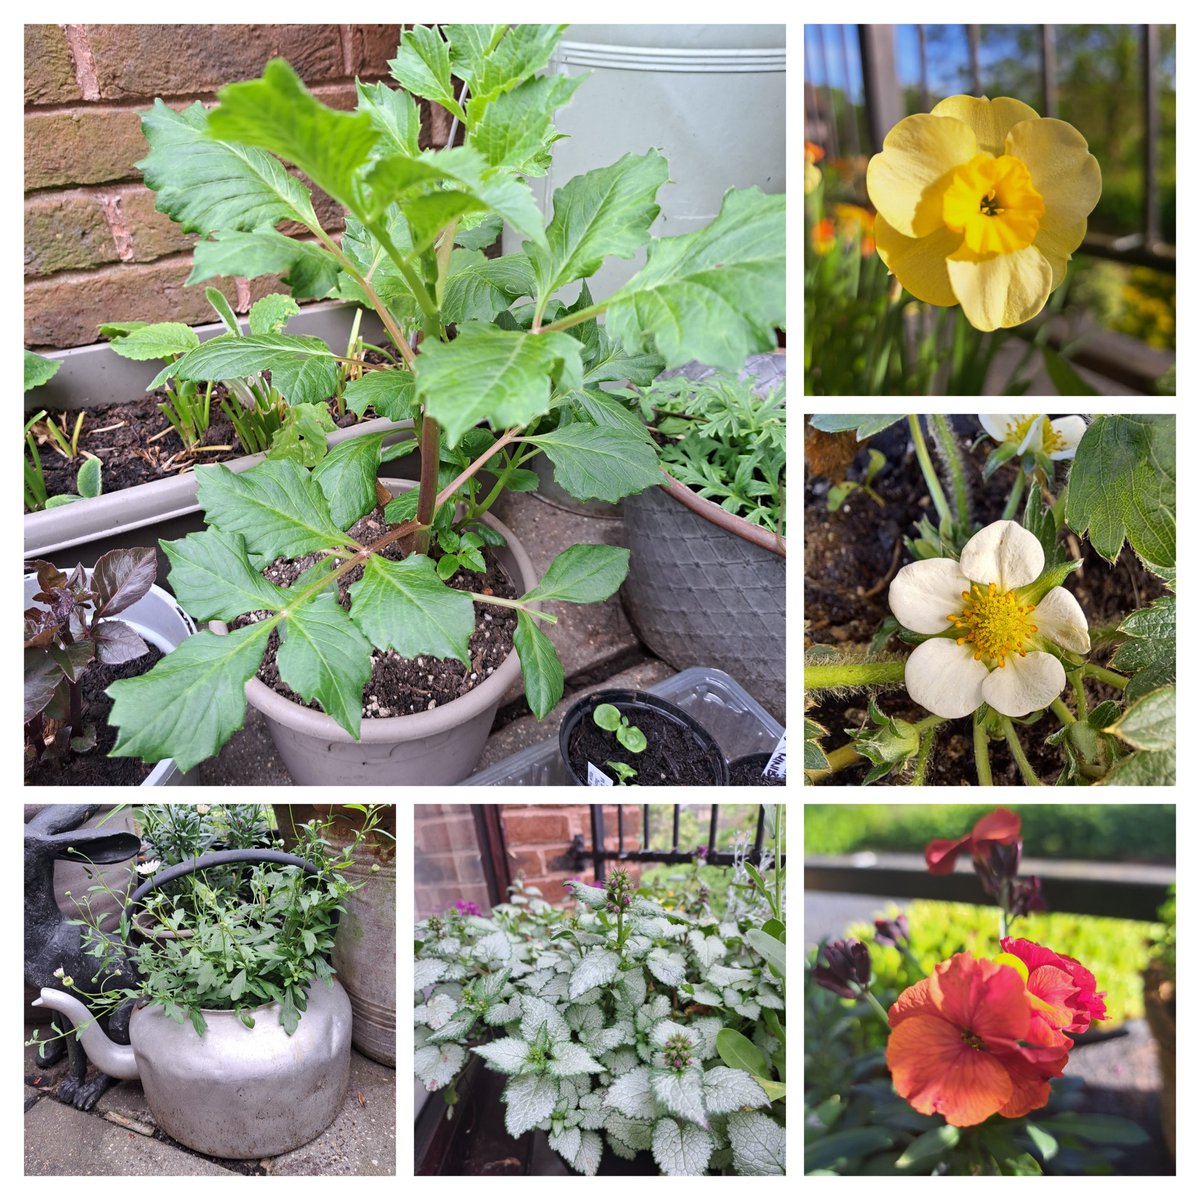 Good morning all, I'm gutted for not seeing the northern lights but on the plus side my dahlia (which was left outside all winter) is thriving! Also a late daff, strawberry flowers, wallflowers, overflowing lamium which will need splitting & a kettle of erigeron #SixOnSaturday